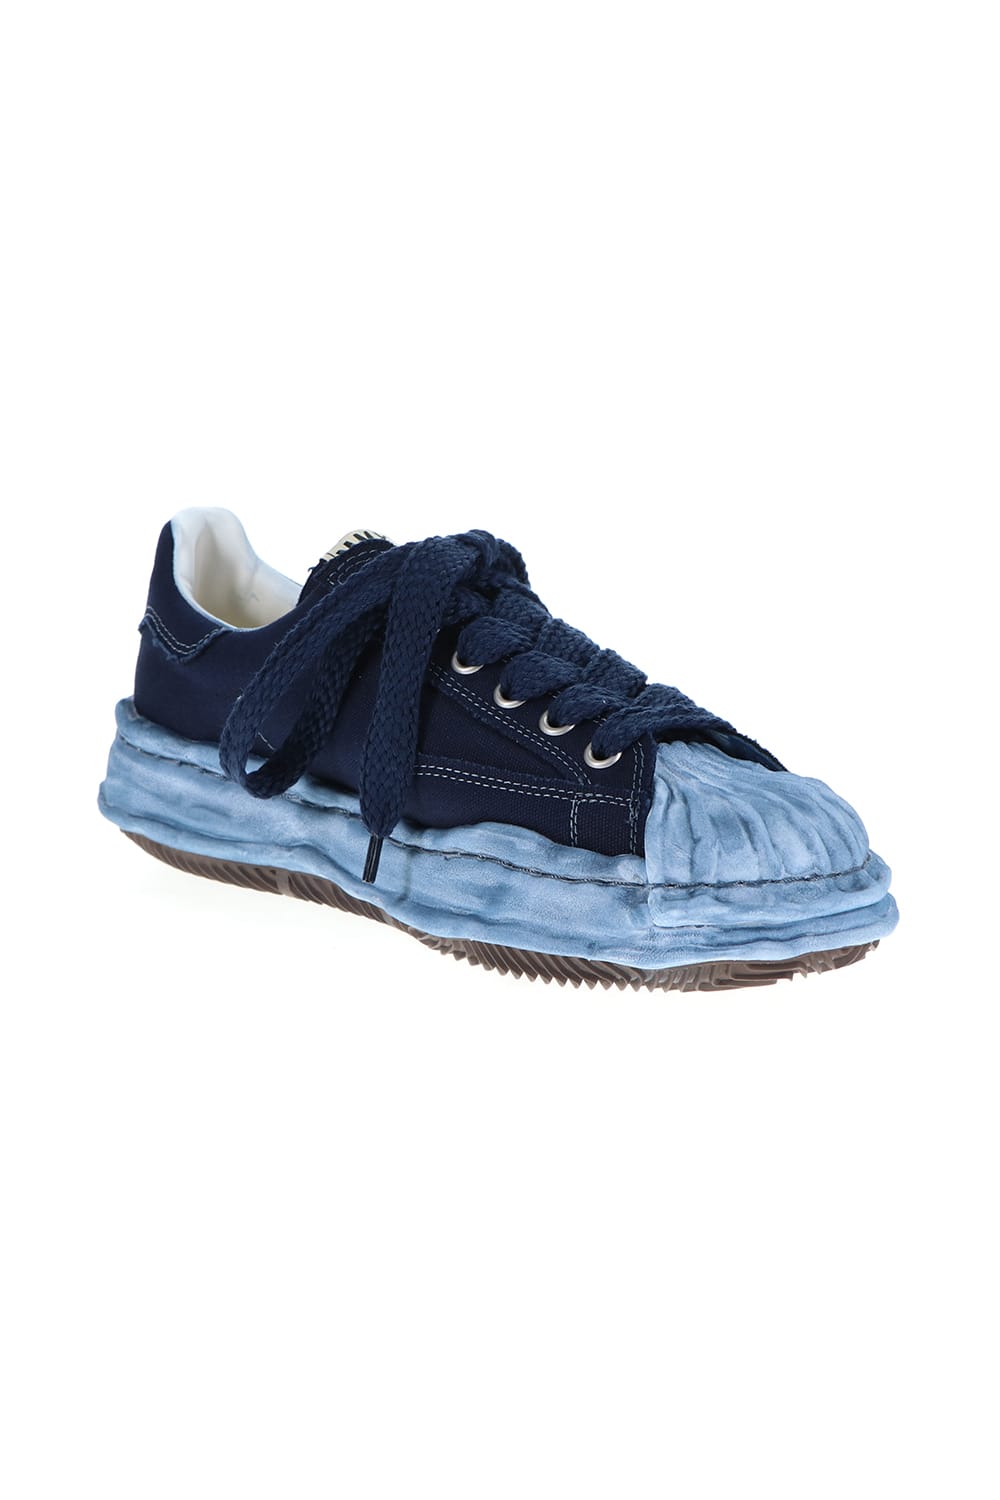 -BLAKEY Low- Original STC sole over dyed canvas Low-Top sneakers Navy